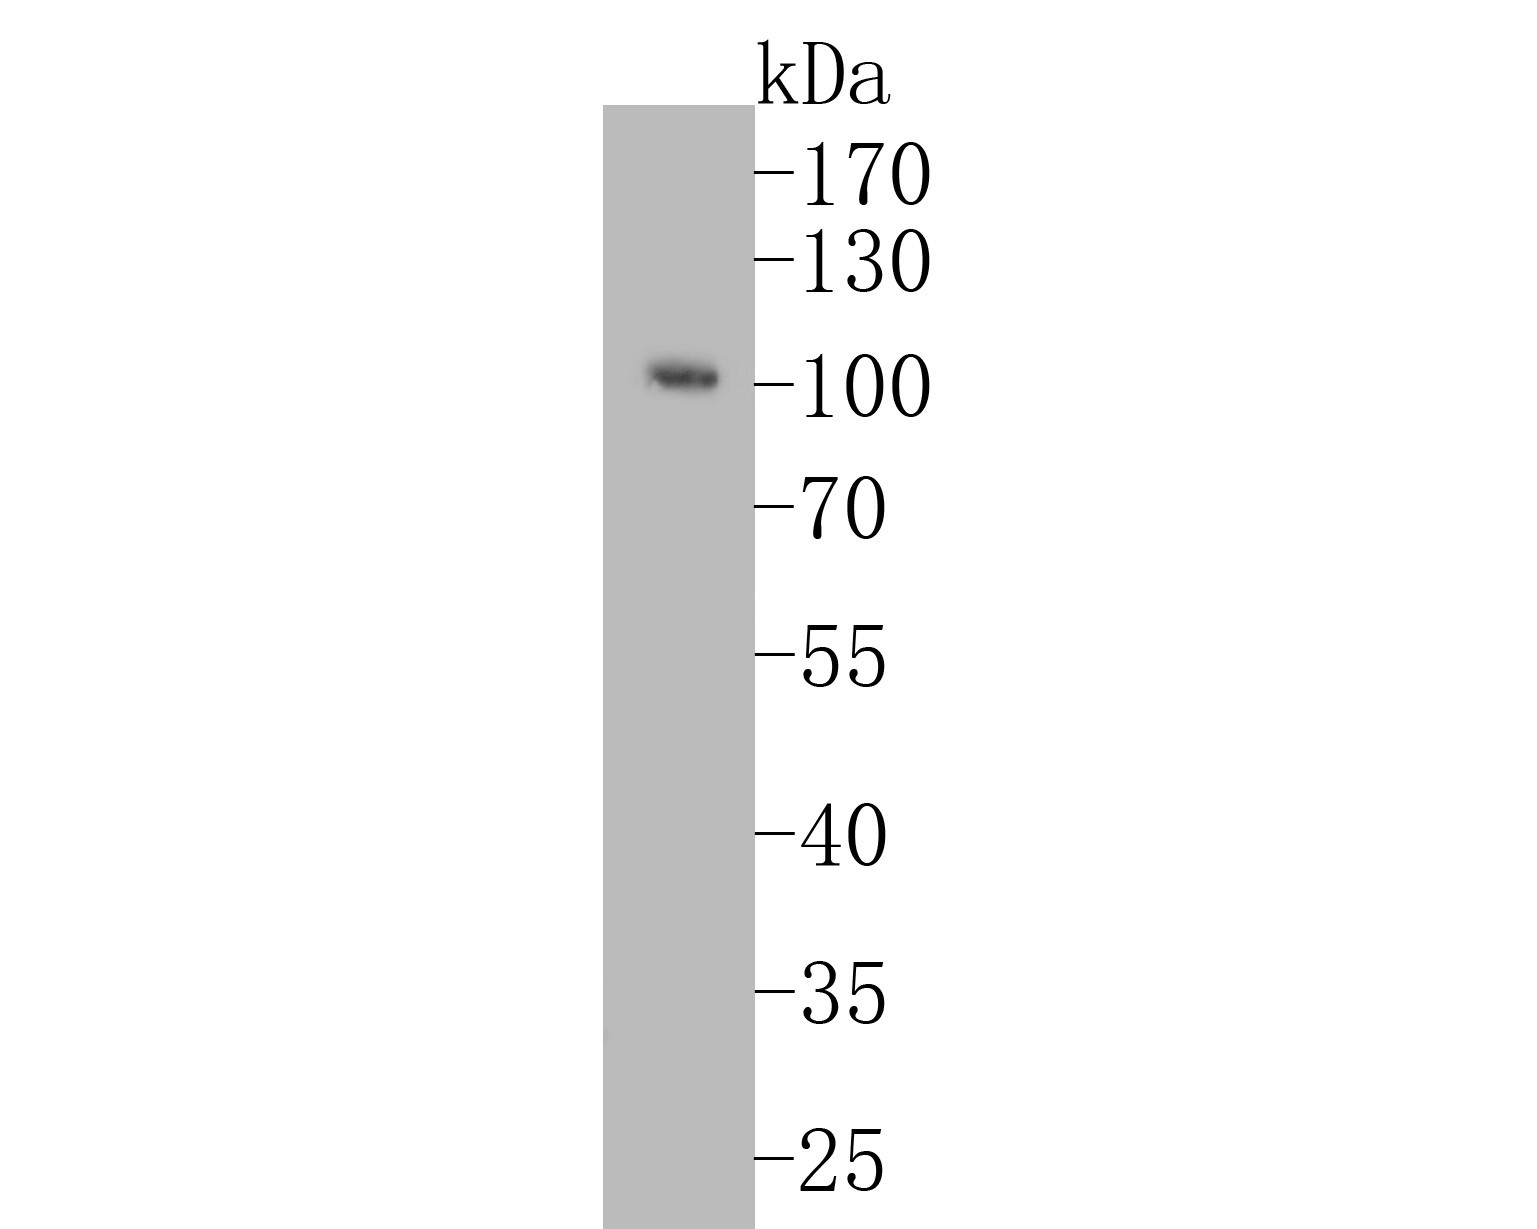 Western blot analysis of Villin1 on human liver tissue lysates. Proteins were transferred to a PVDF membrane and blocked with 5% BSA in PBS for 1 hour at room temperature. The primary antibody (ET7110-55, 1/500) was used in 5% BSA at room temperature for 2 hours. Goat Anti-Rabbit IgG - HRP Secondary Antibody (HA1001) at 1:5,000 dilution was used for 1 hour at room temperature.